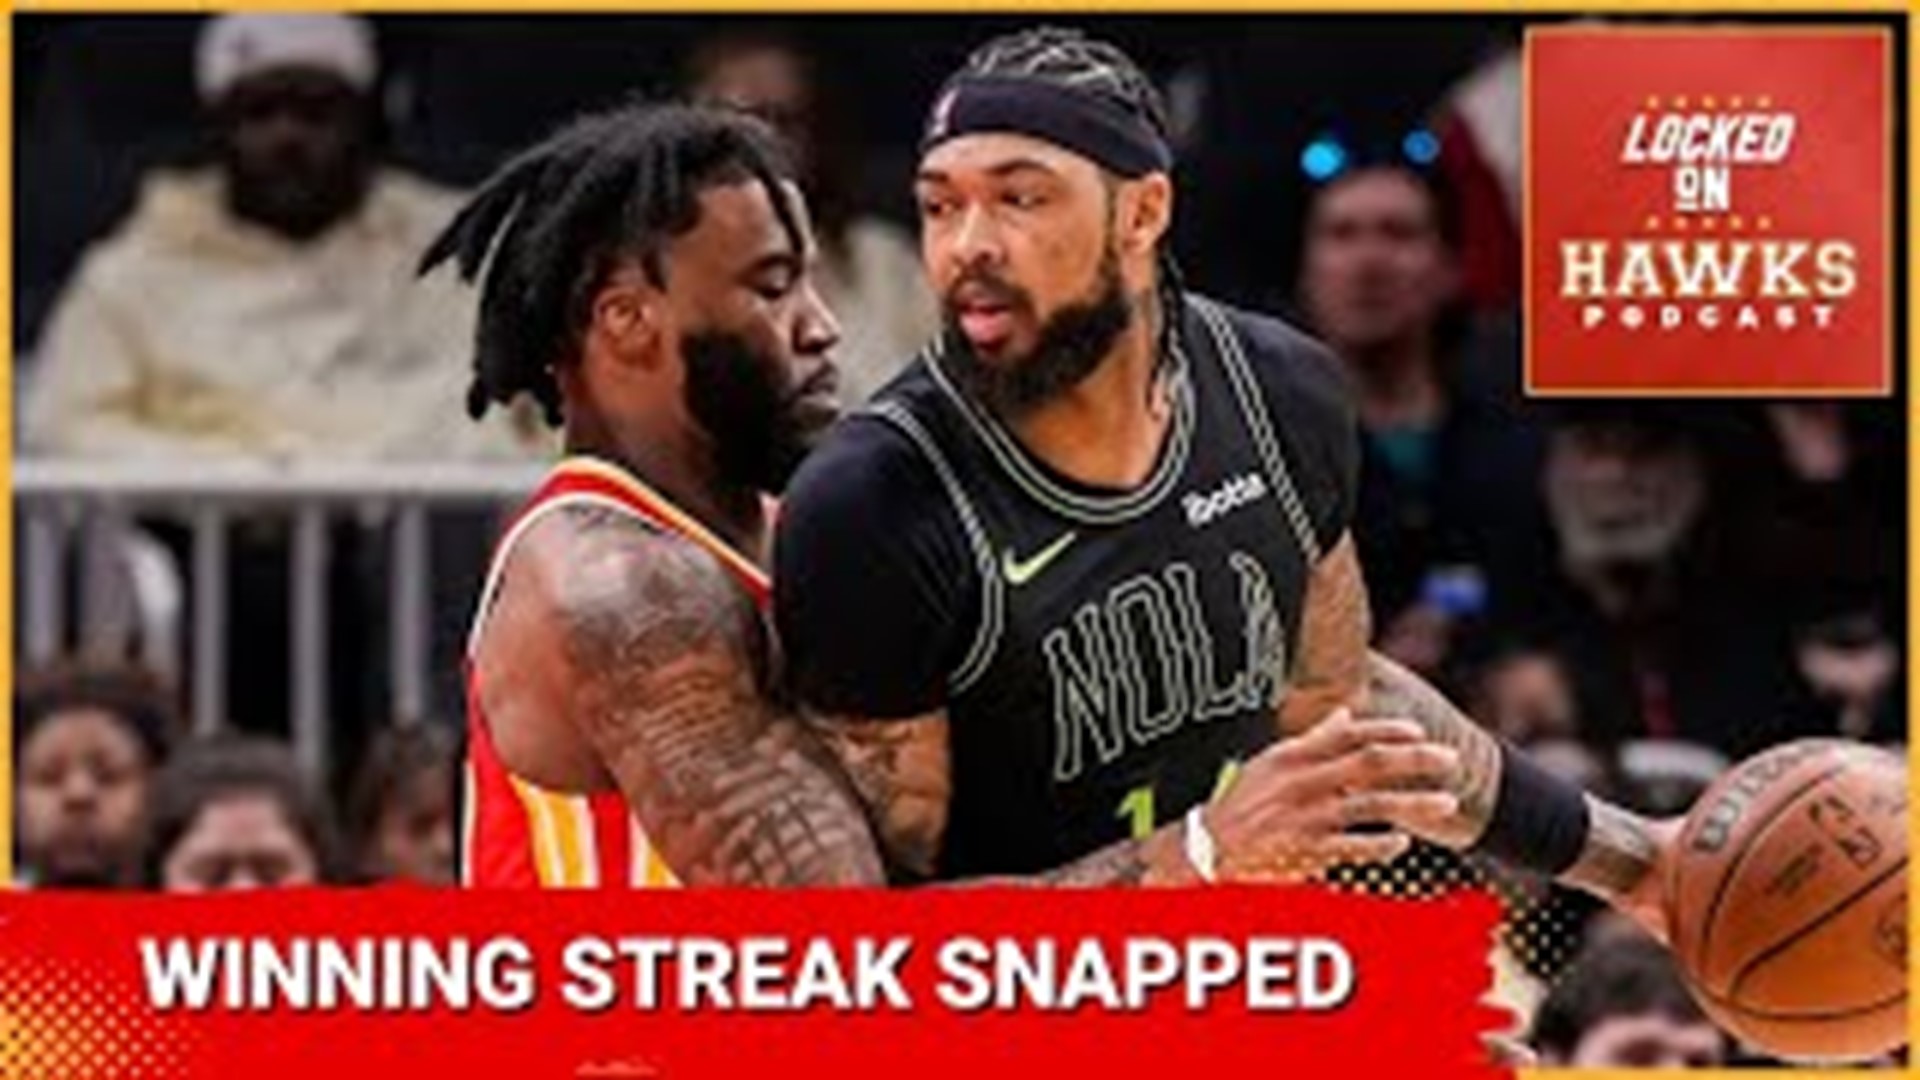 Brad Rowland hosts episode No. 1671 of the Locked on Hawks podcast. The show breaks down Sunday's game between the Atlanta Hawks and the New Orleans Pelicans.